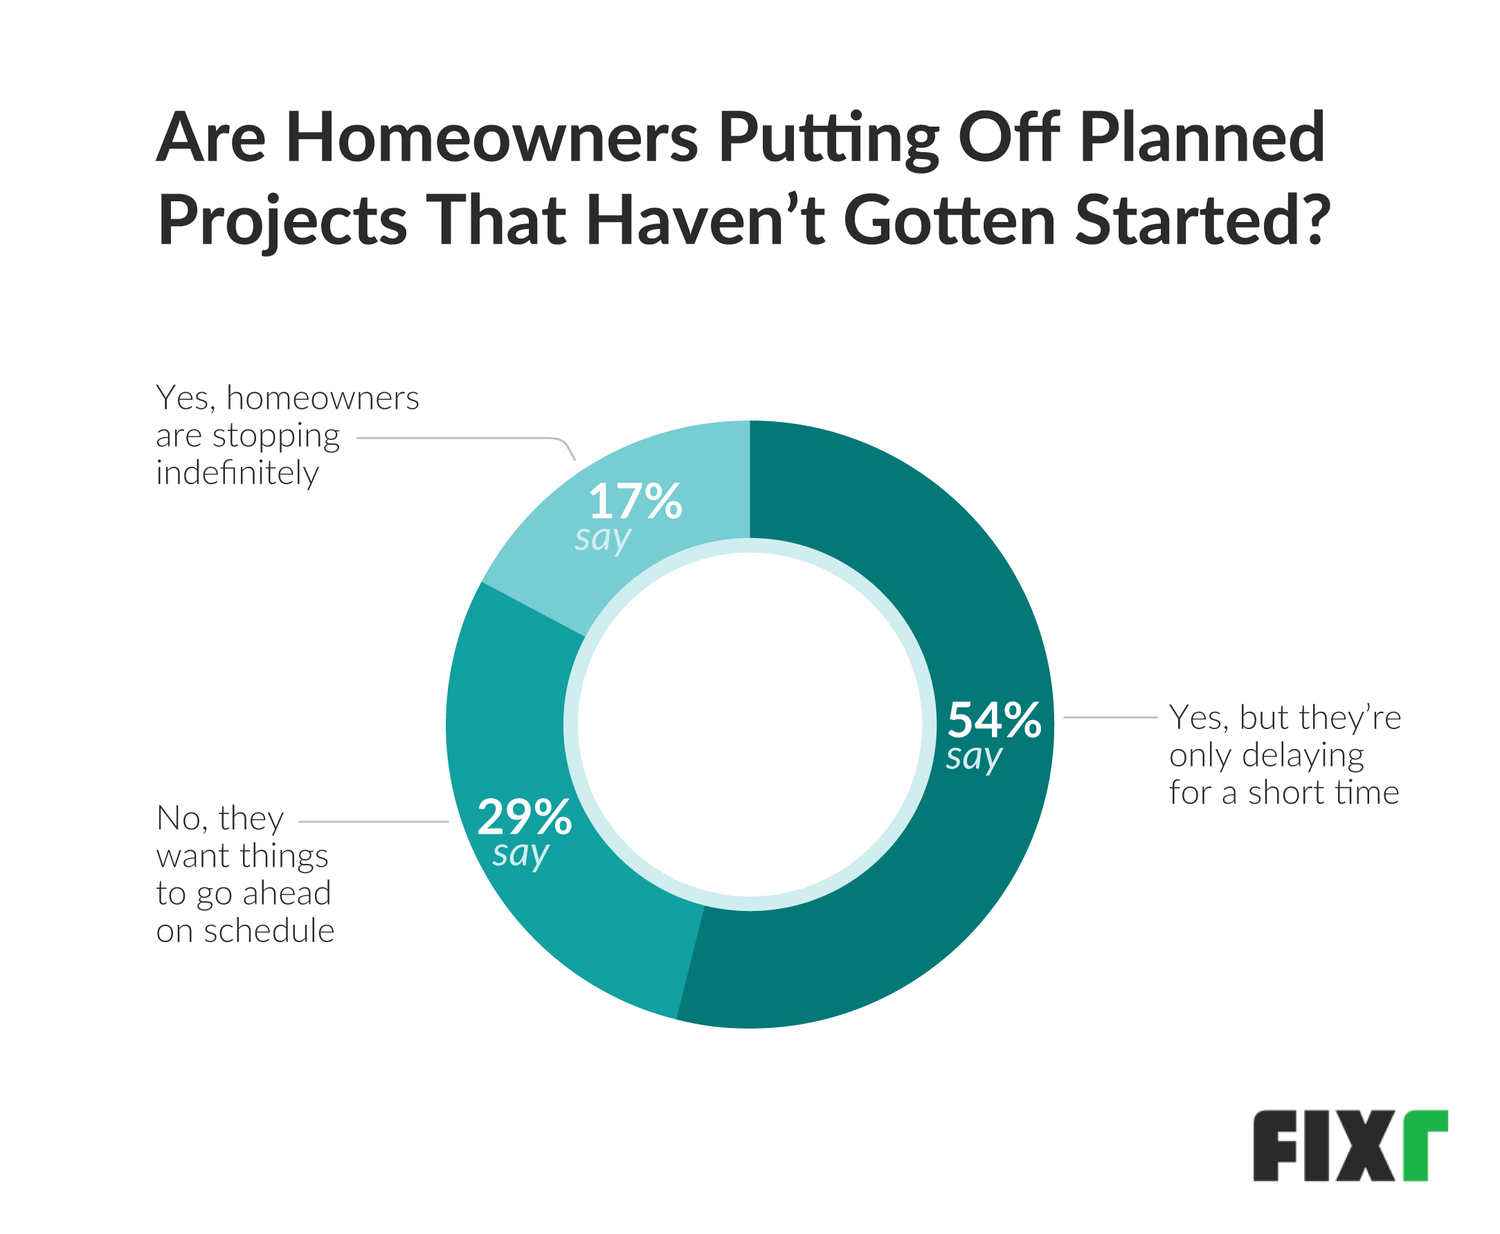 Homeowners putting off projects 